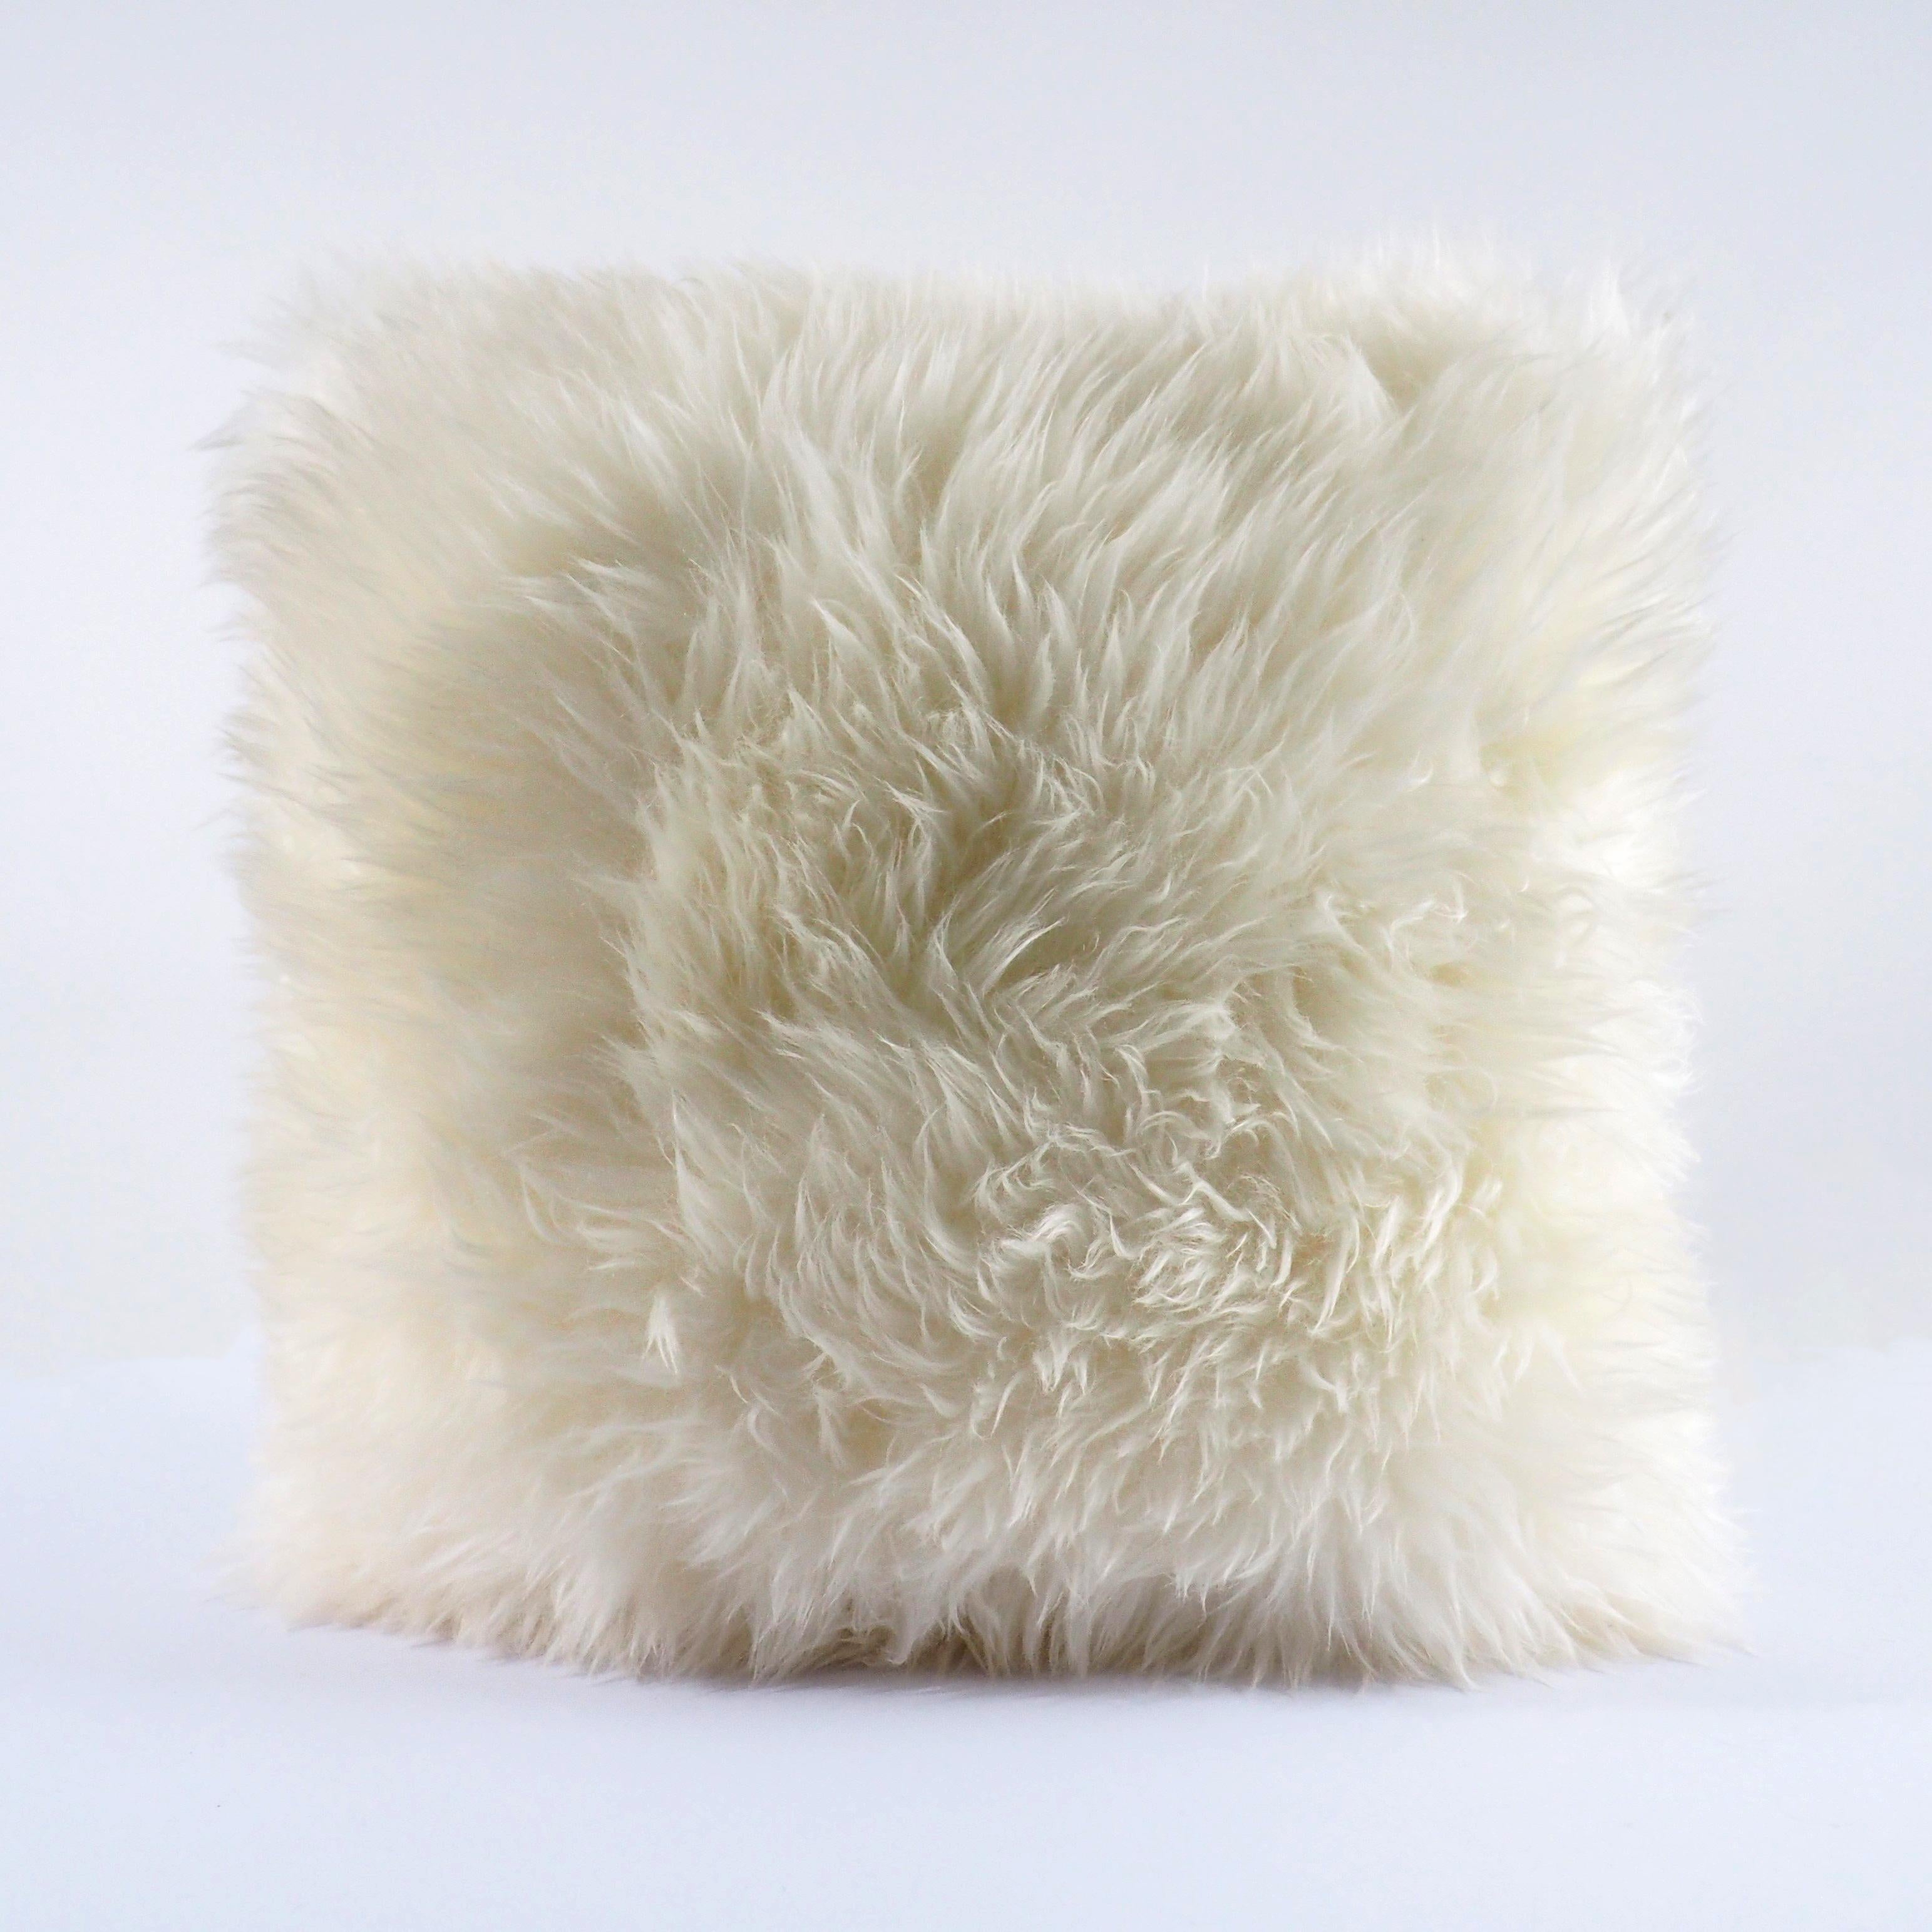 Milky Way Wool White Shearling Sheepskin Pillow Fluffy Cushion by Muchi Decor In New Condition For Sale In Poviglio, IT